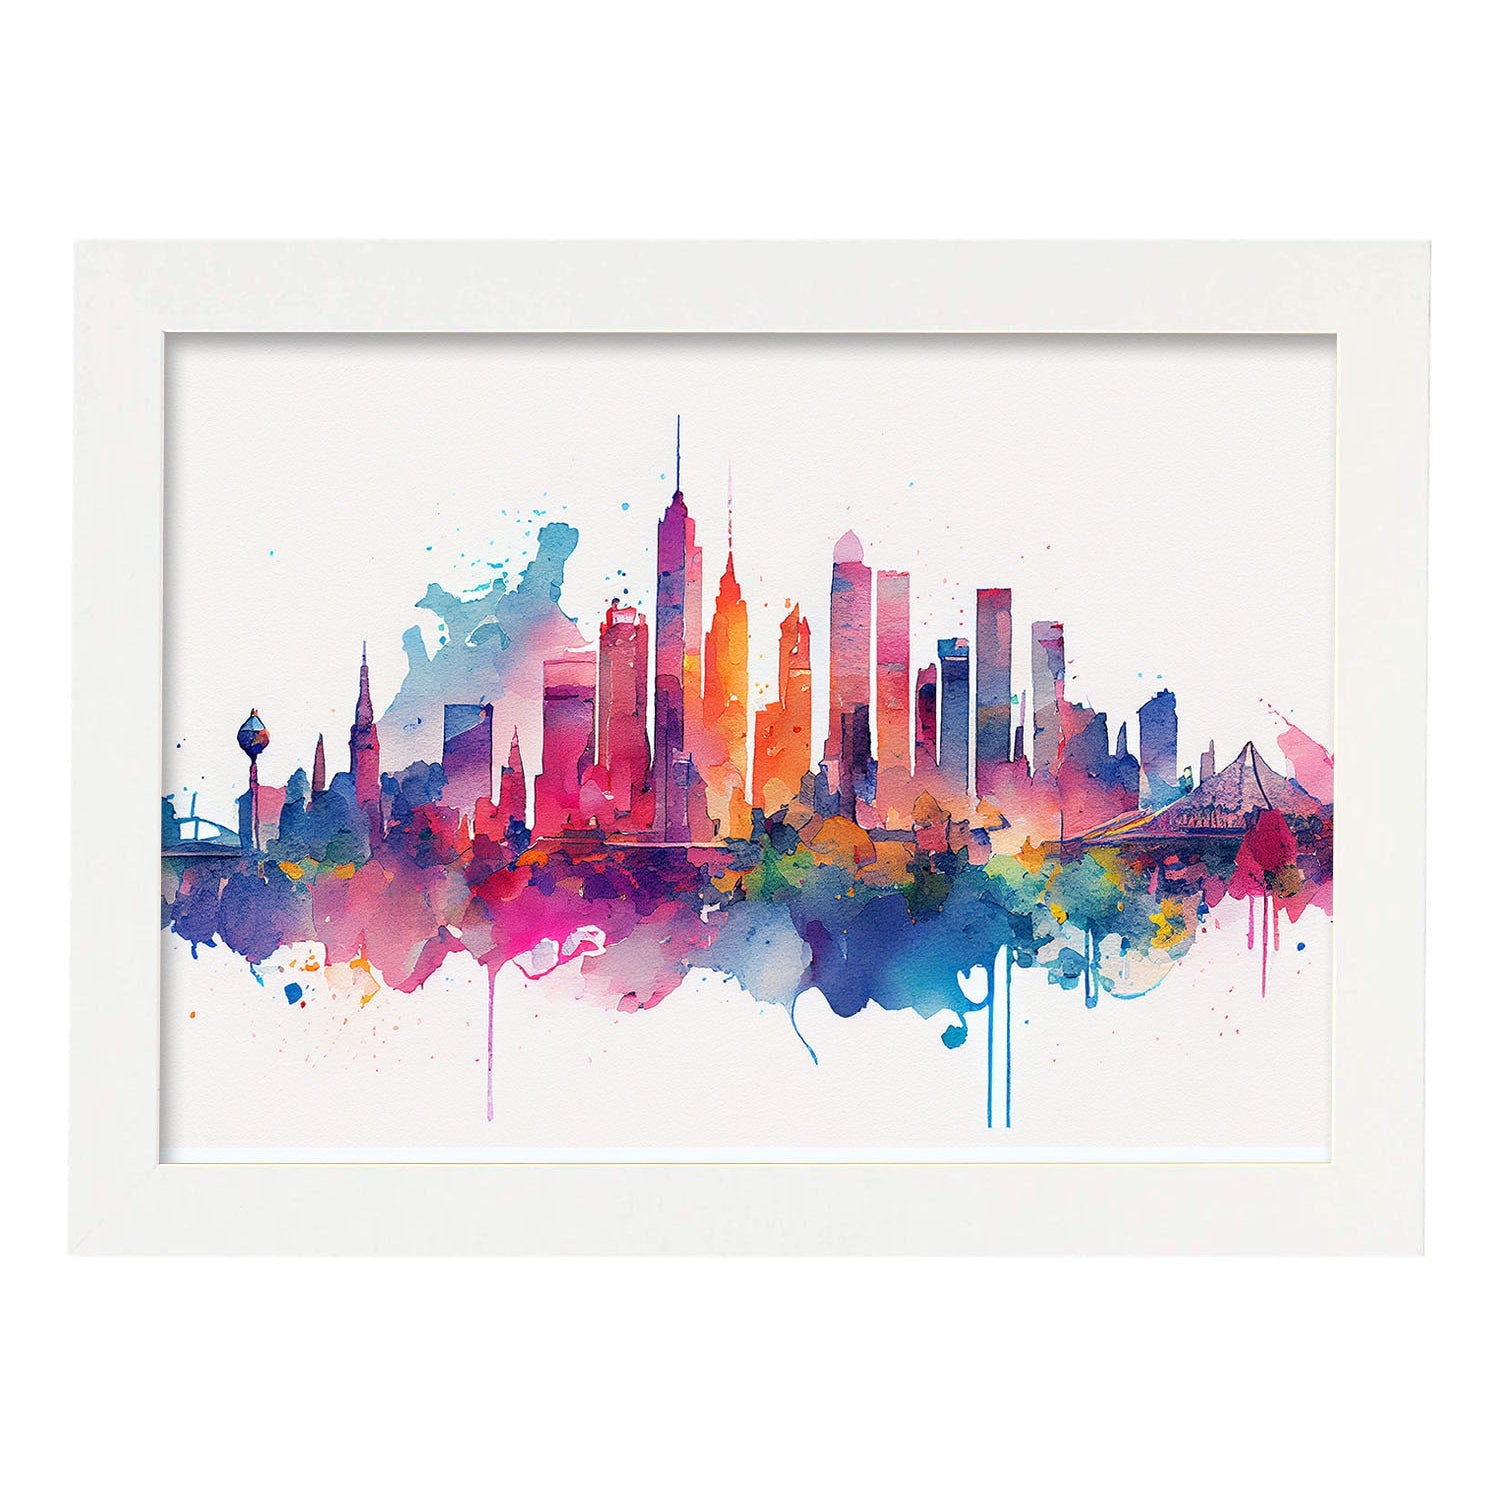 Nacnic watercolor of a skyline of the city of Melbourne. Aesthetic Wall Art Prints for Bedroom or Living Room Design.-Artwork-Nacnic-A4-Marco Blanco-Nacnic Estudio SL